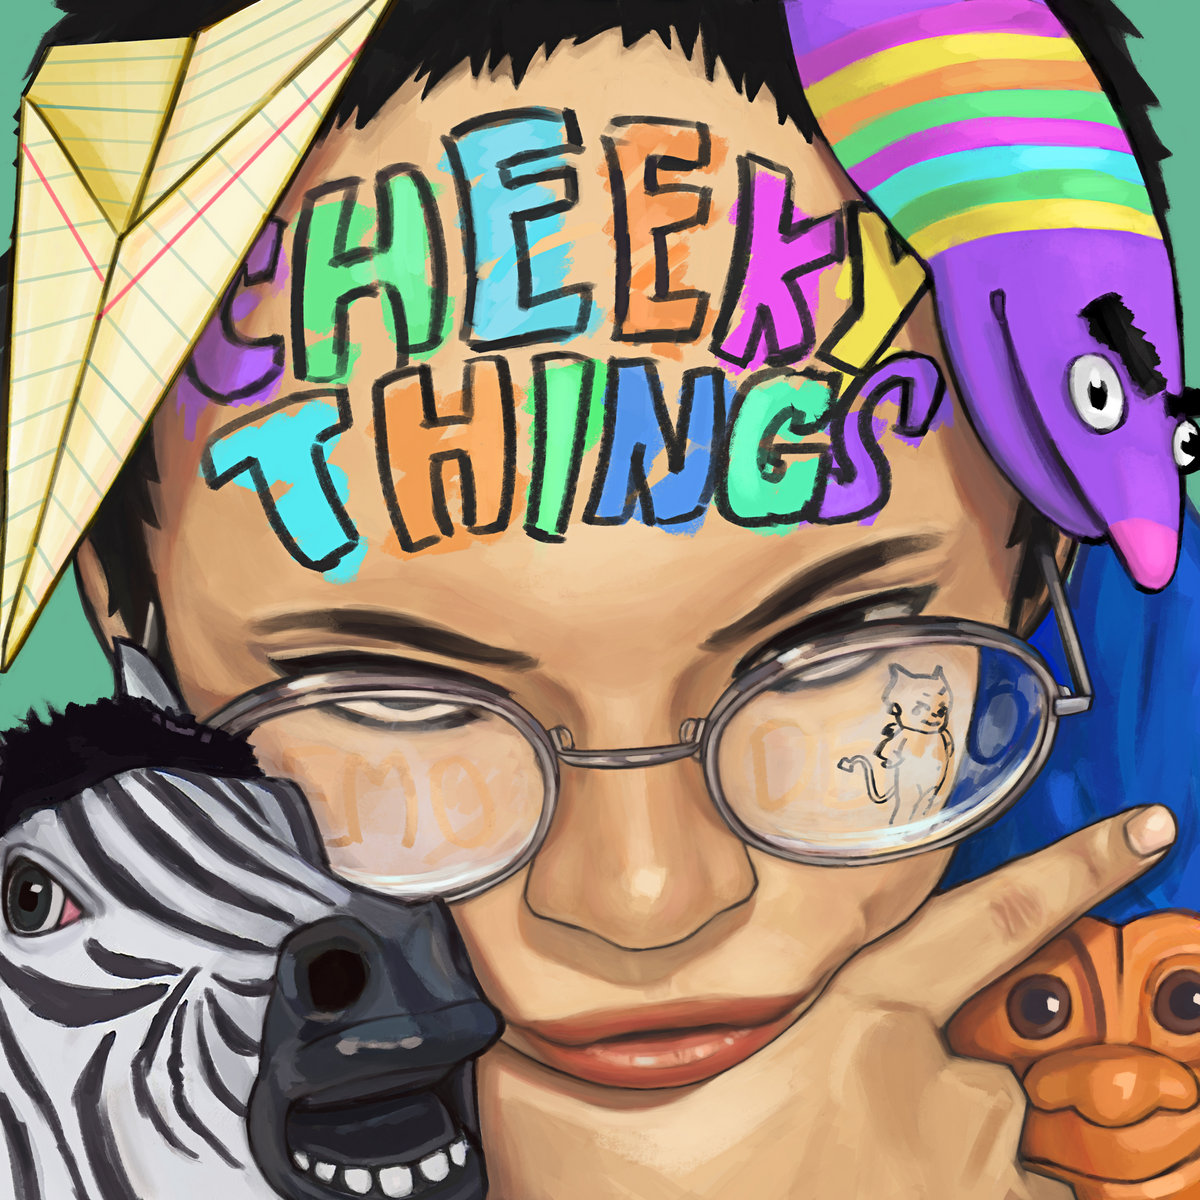 DEMO REVIEW: cheeky things – demo